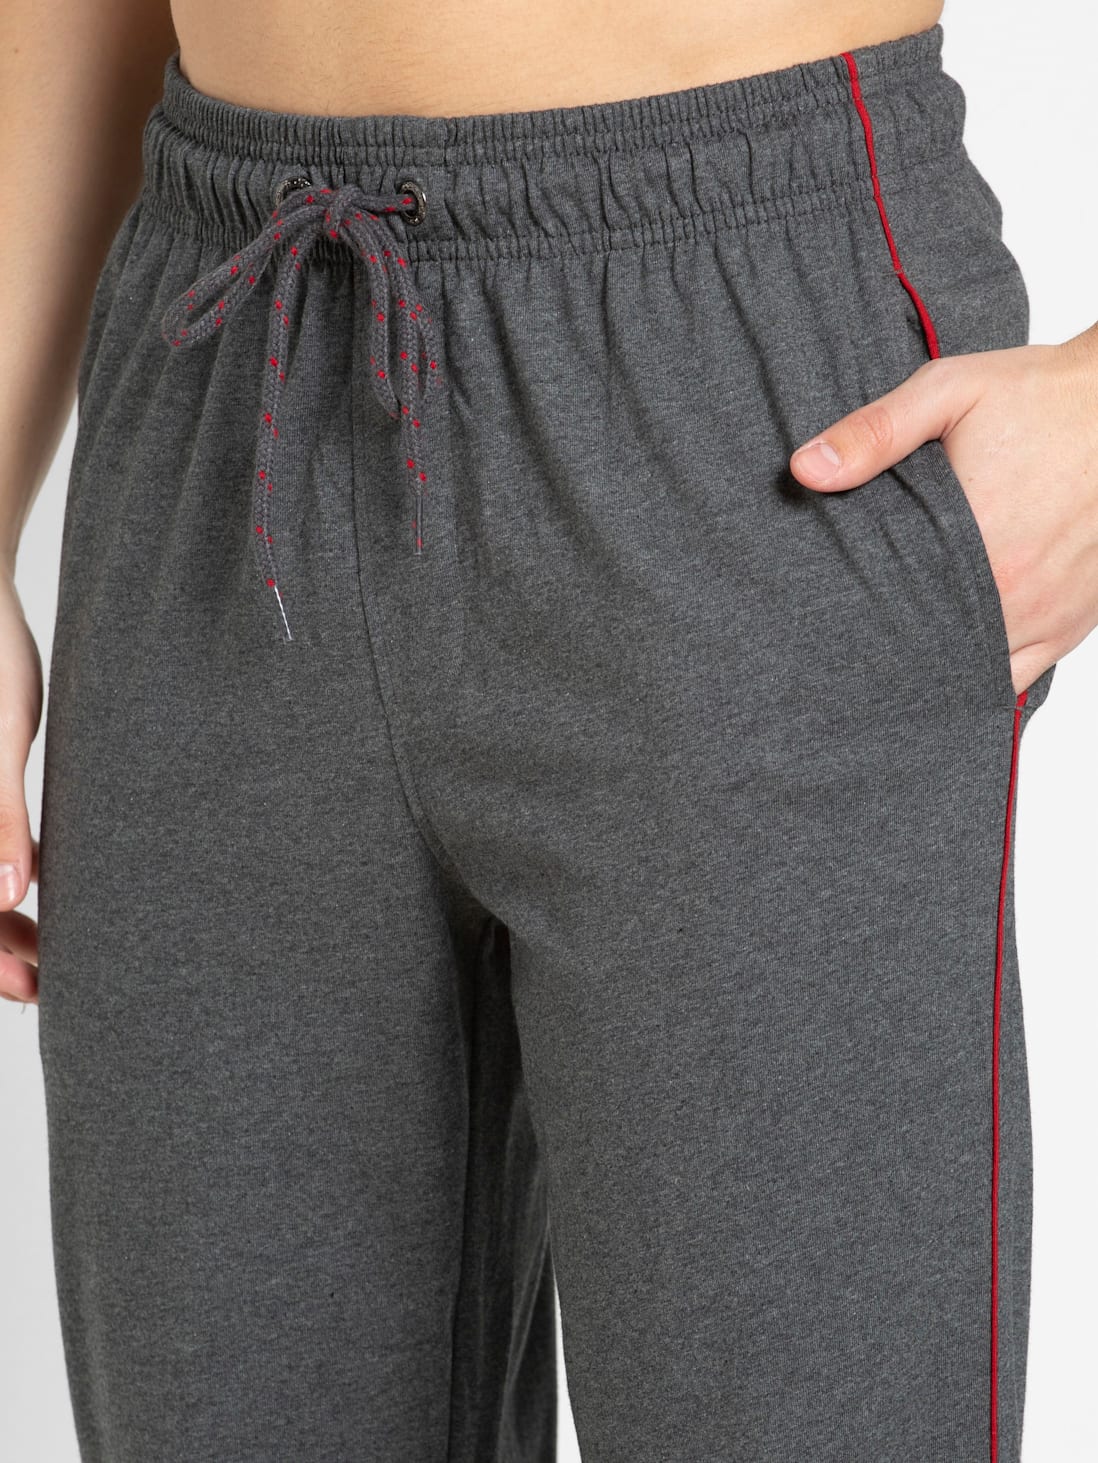 Jockey Womens Athleisure Track Pant Lower 1301  Online Shopping site in  India